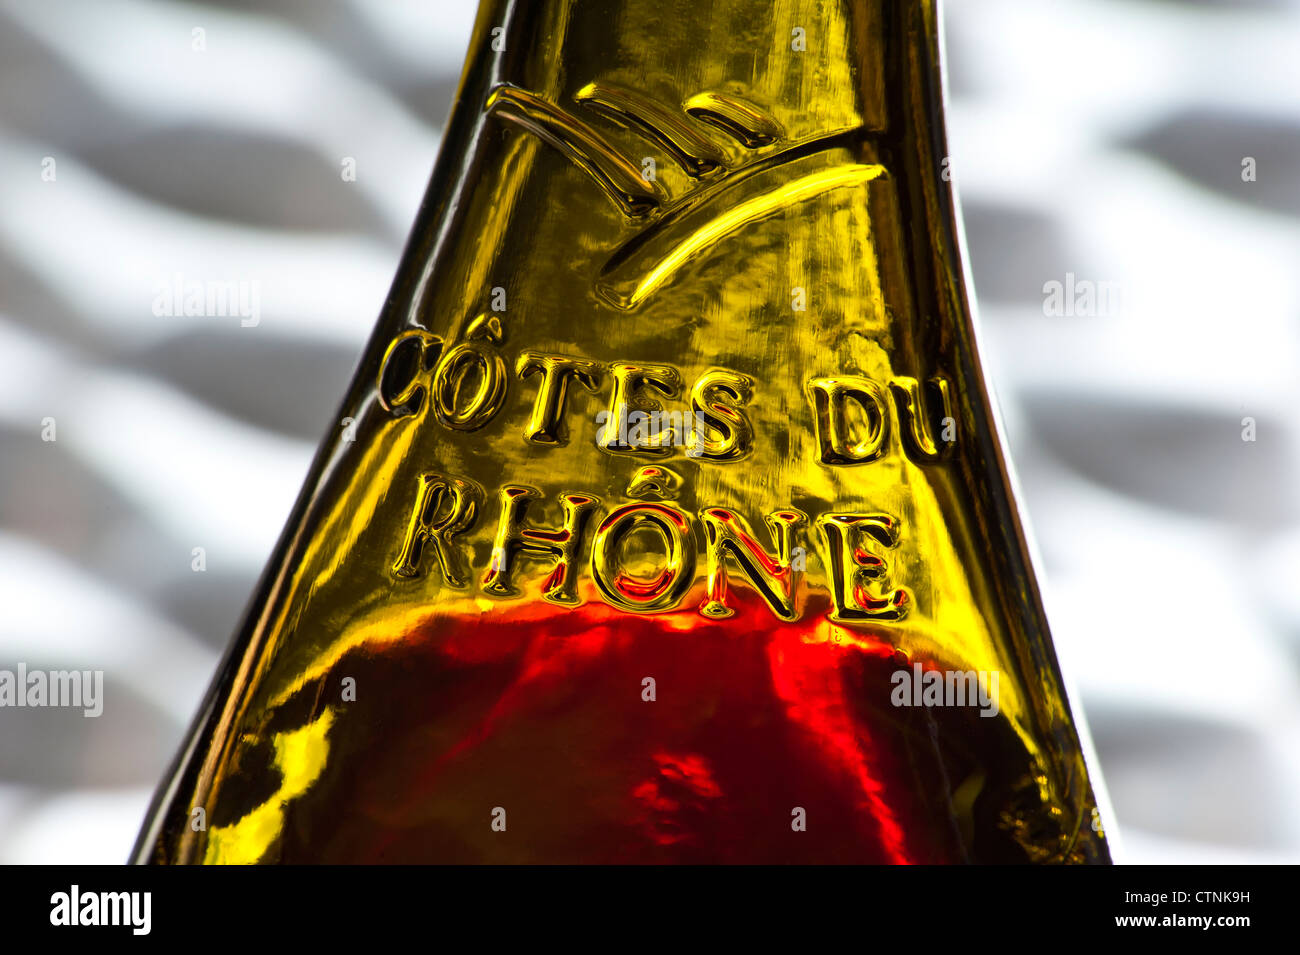 Close view on the glass relief label on a bottle of French Cotes du Rhone red wine Stock Photo